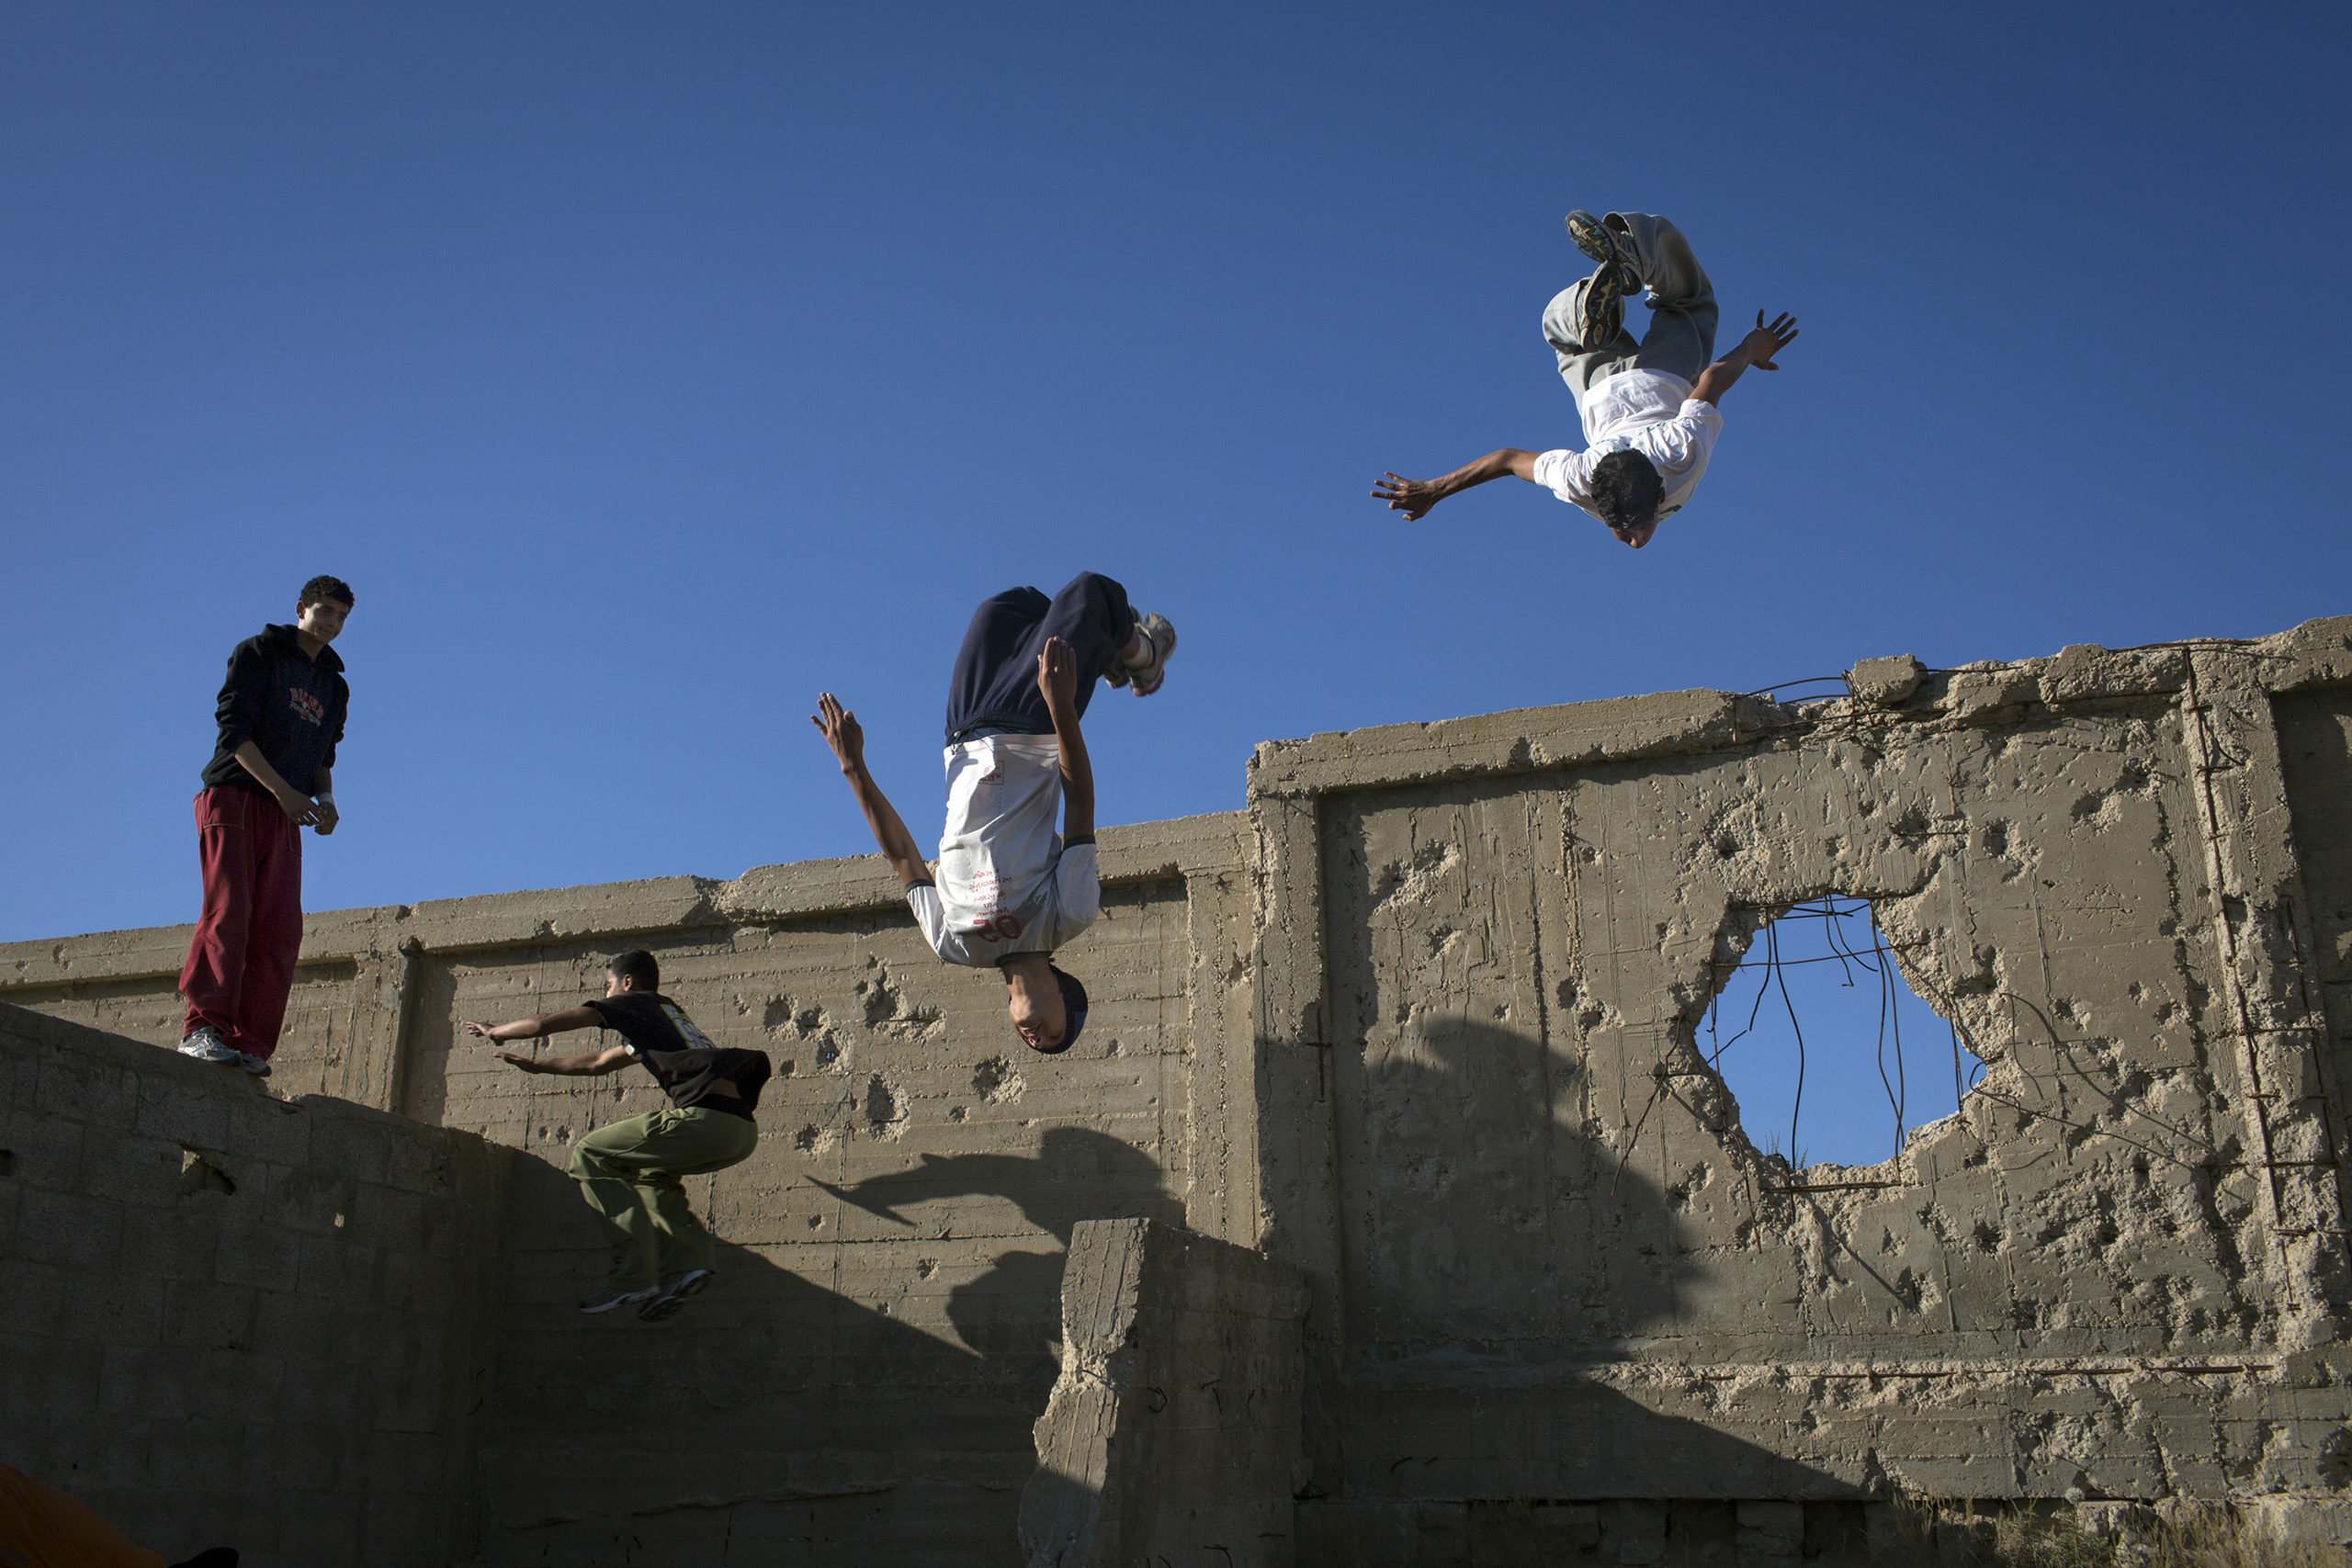 The Gaza Parkour And Free Running team practice in a cemetery on the outskirts of their refugee camp in Khan Younis, Gaza. The walls show damage from past Israeli incursions.